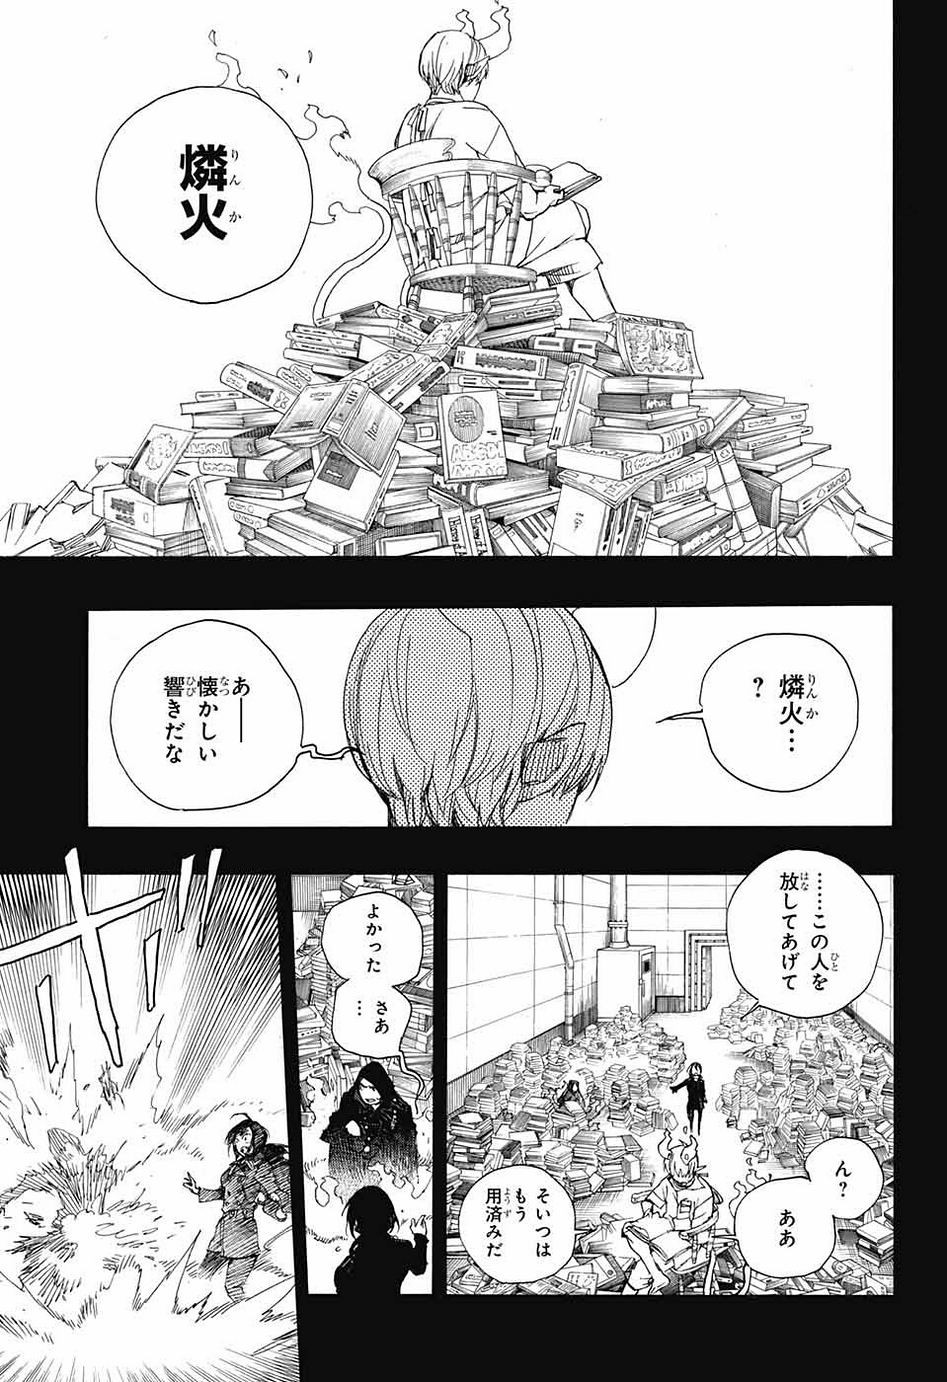 Ao no Exorcist - Chapter 105 - Page 34